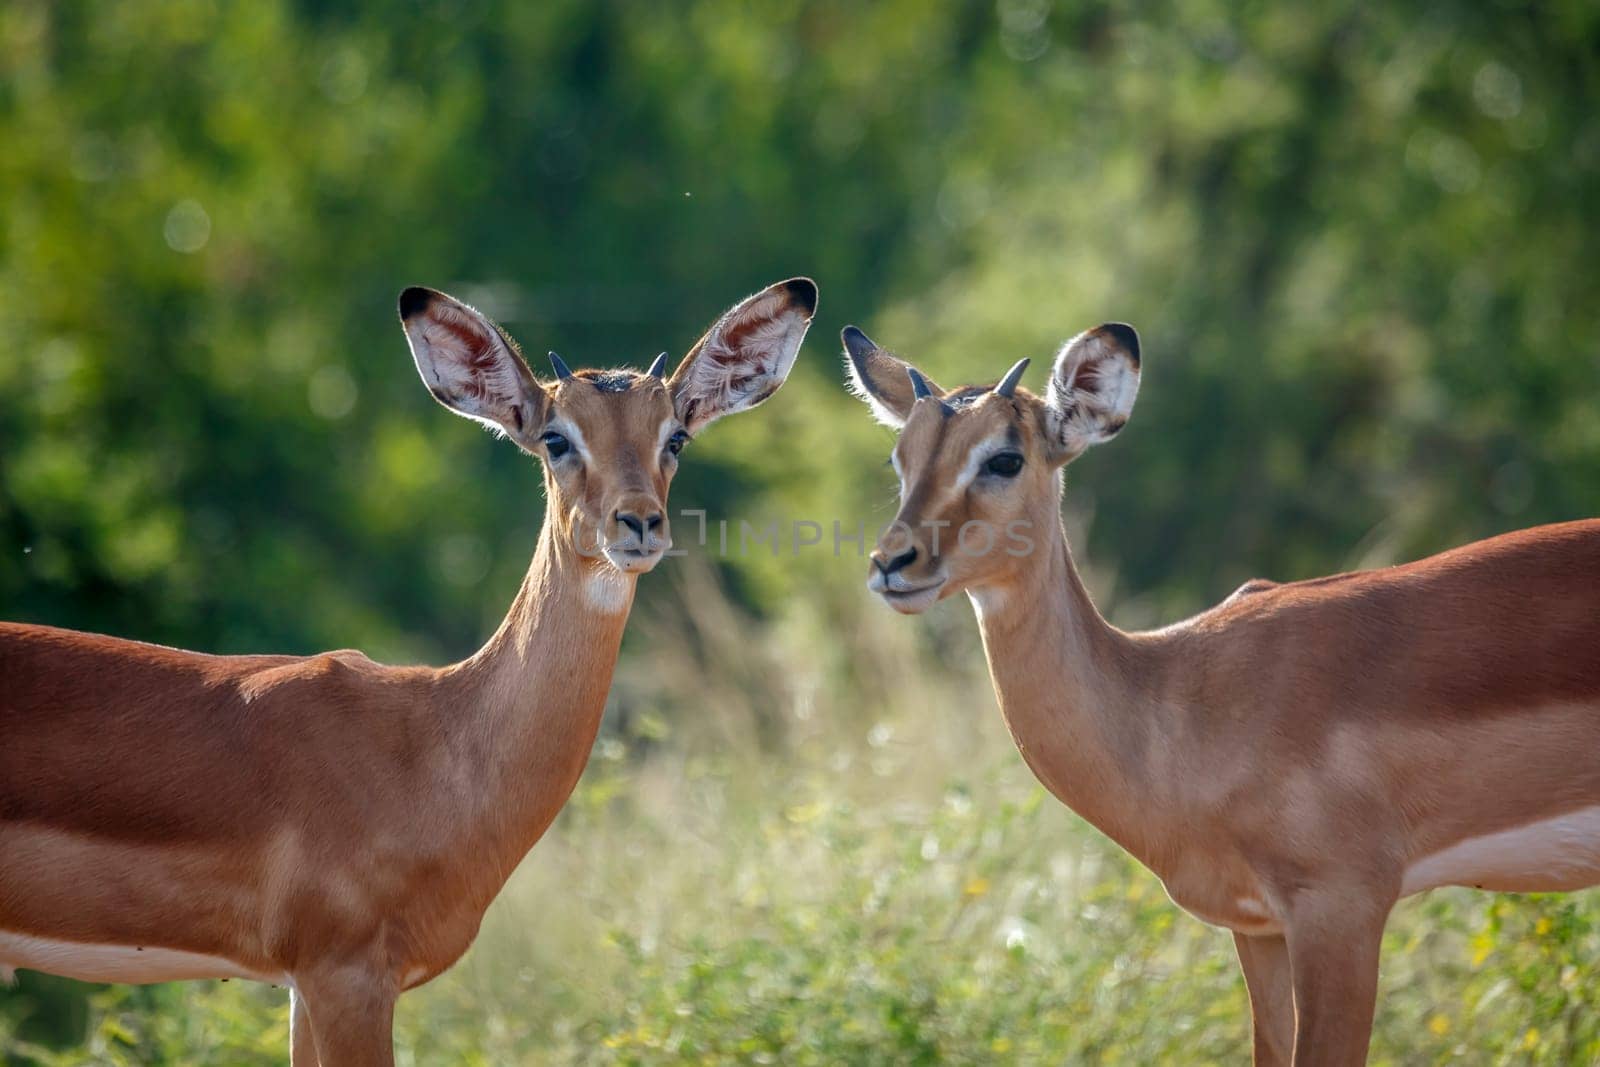 Two young Common Impala portrait in Kruger National park, South Africa ; Specie Aepyceros melampus family of Bovidae